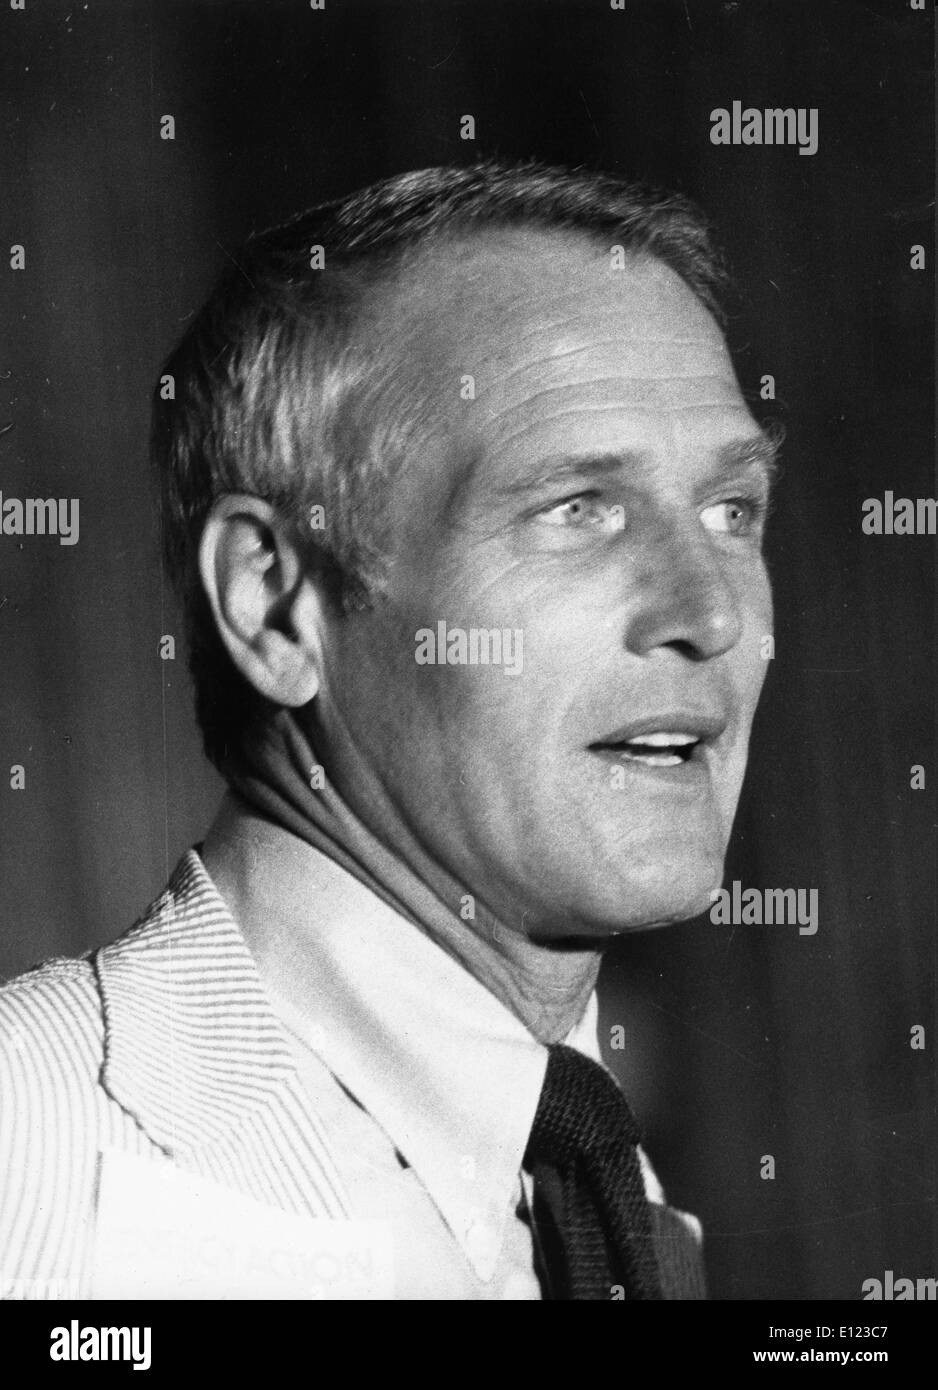 Jan. 01, 1985 - File Photo: circa 1980s, location unknown. Actor PAUL LEONARD NEWMAN (born January 26, 1925) is an Academy Award-winning American actor and film director. He is the founder of Newman's Own. He has donated all of the company's profits and royalties, in excess of $200 million, to thousands of charities. Married twice first Jackie Witte and Joanne Woodward and has four children. Stock Photo